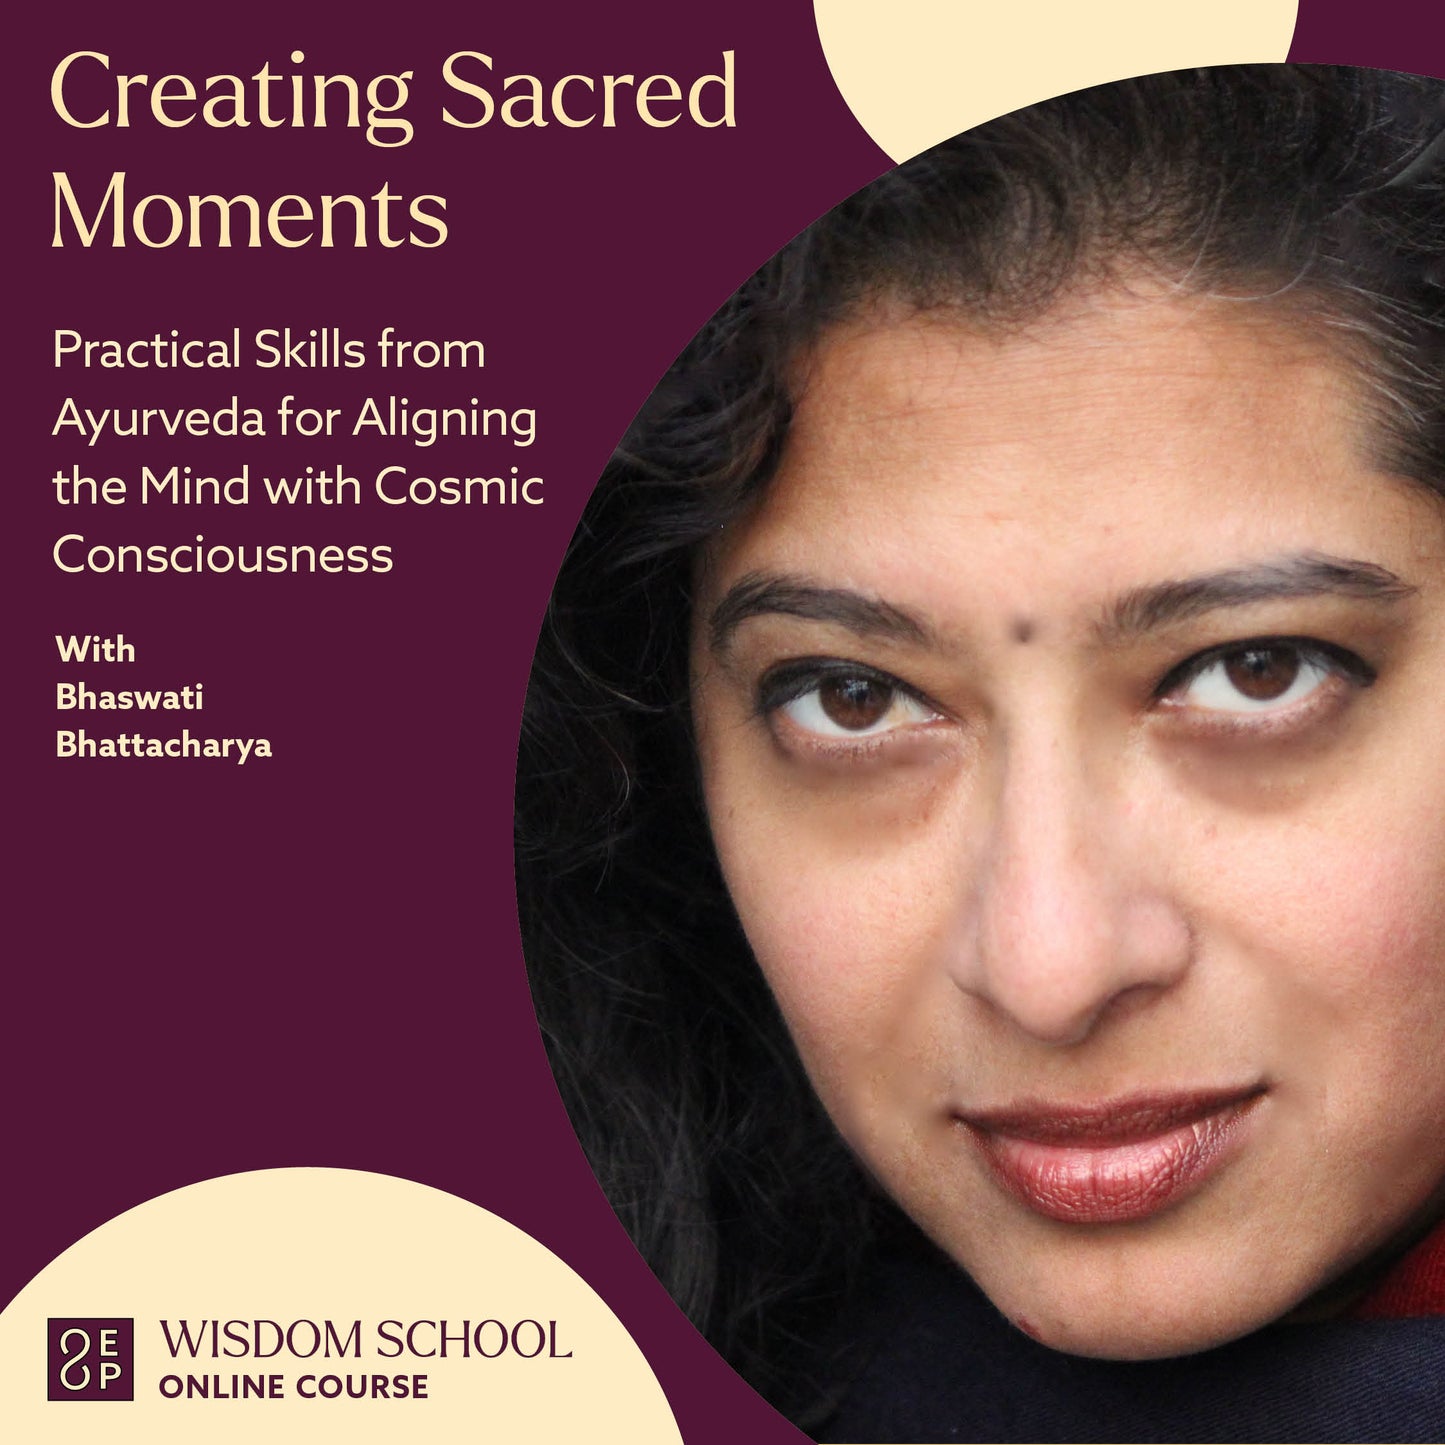 Creating Sacred Moments: Practical Skills from Ayurveda